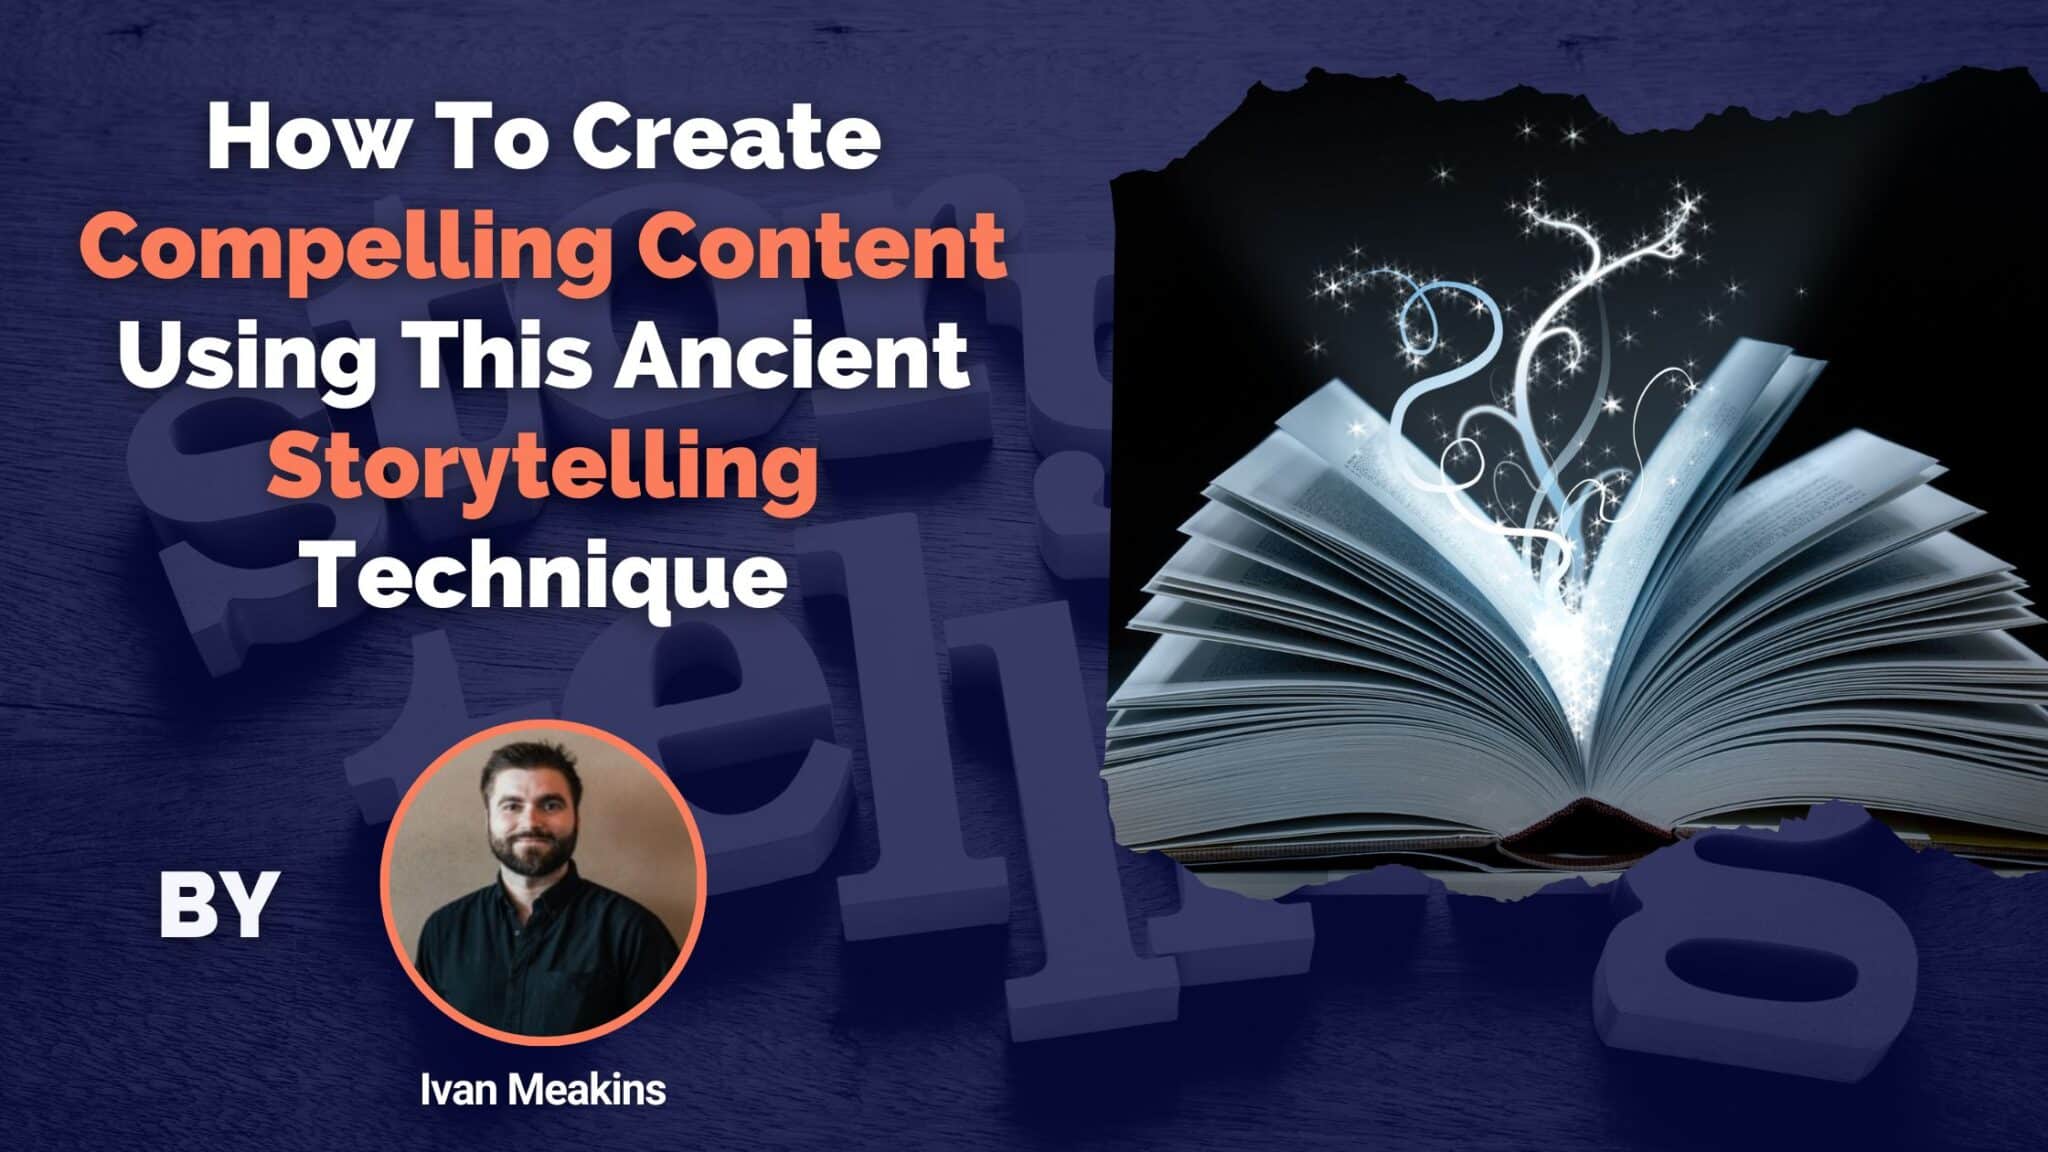 How To Create Compelling Content Using This Ancient Storytelling Technique